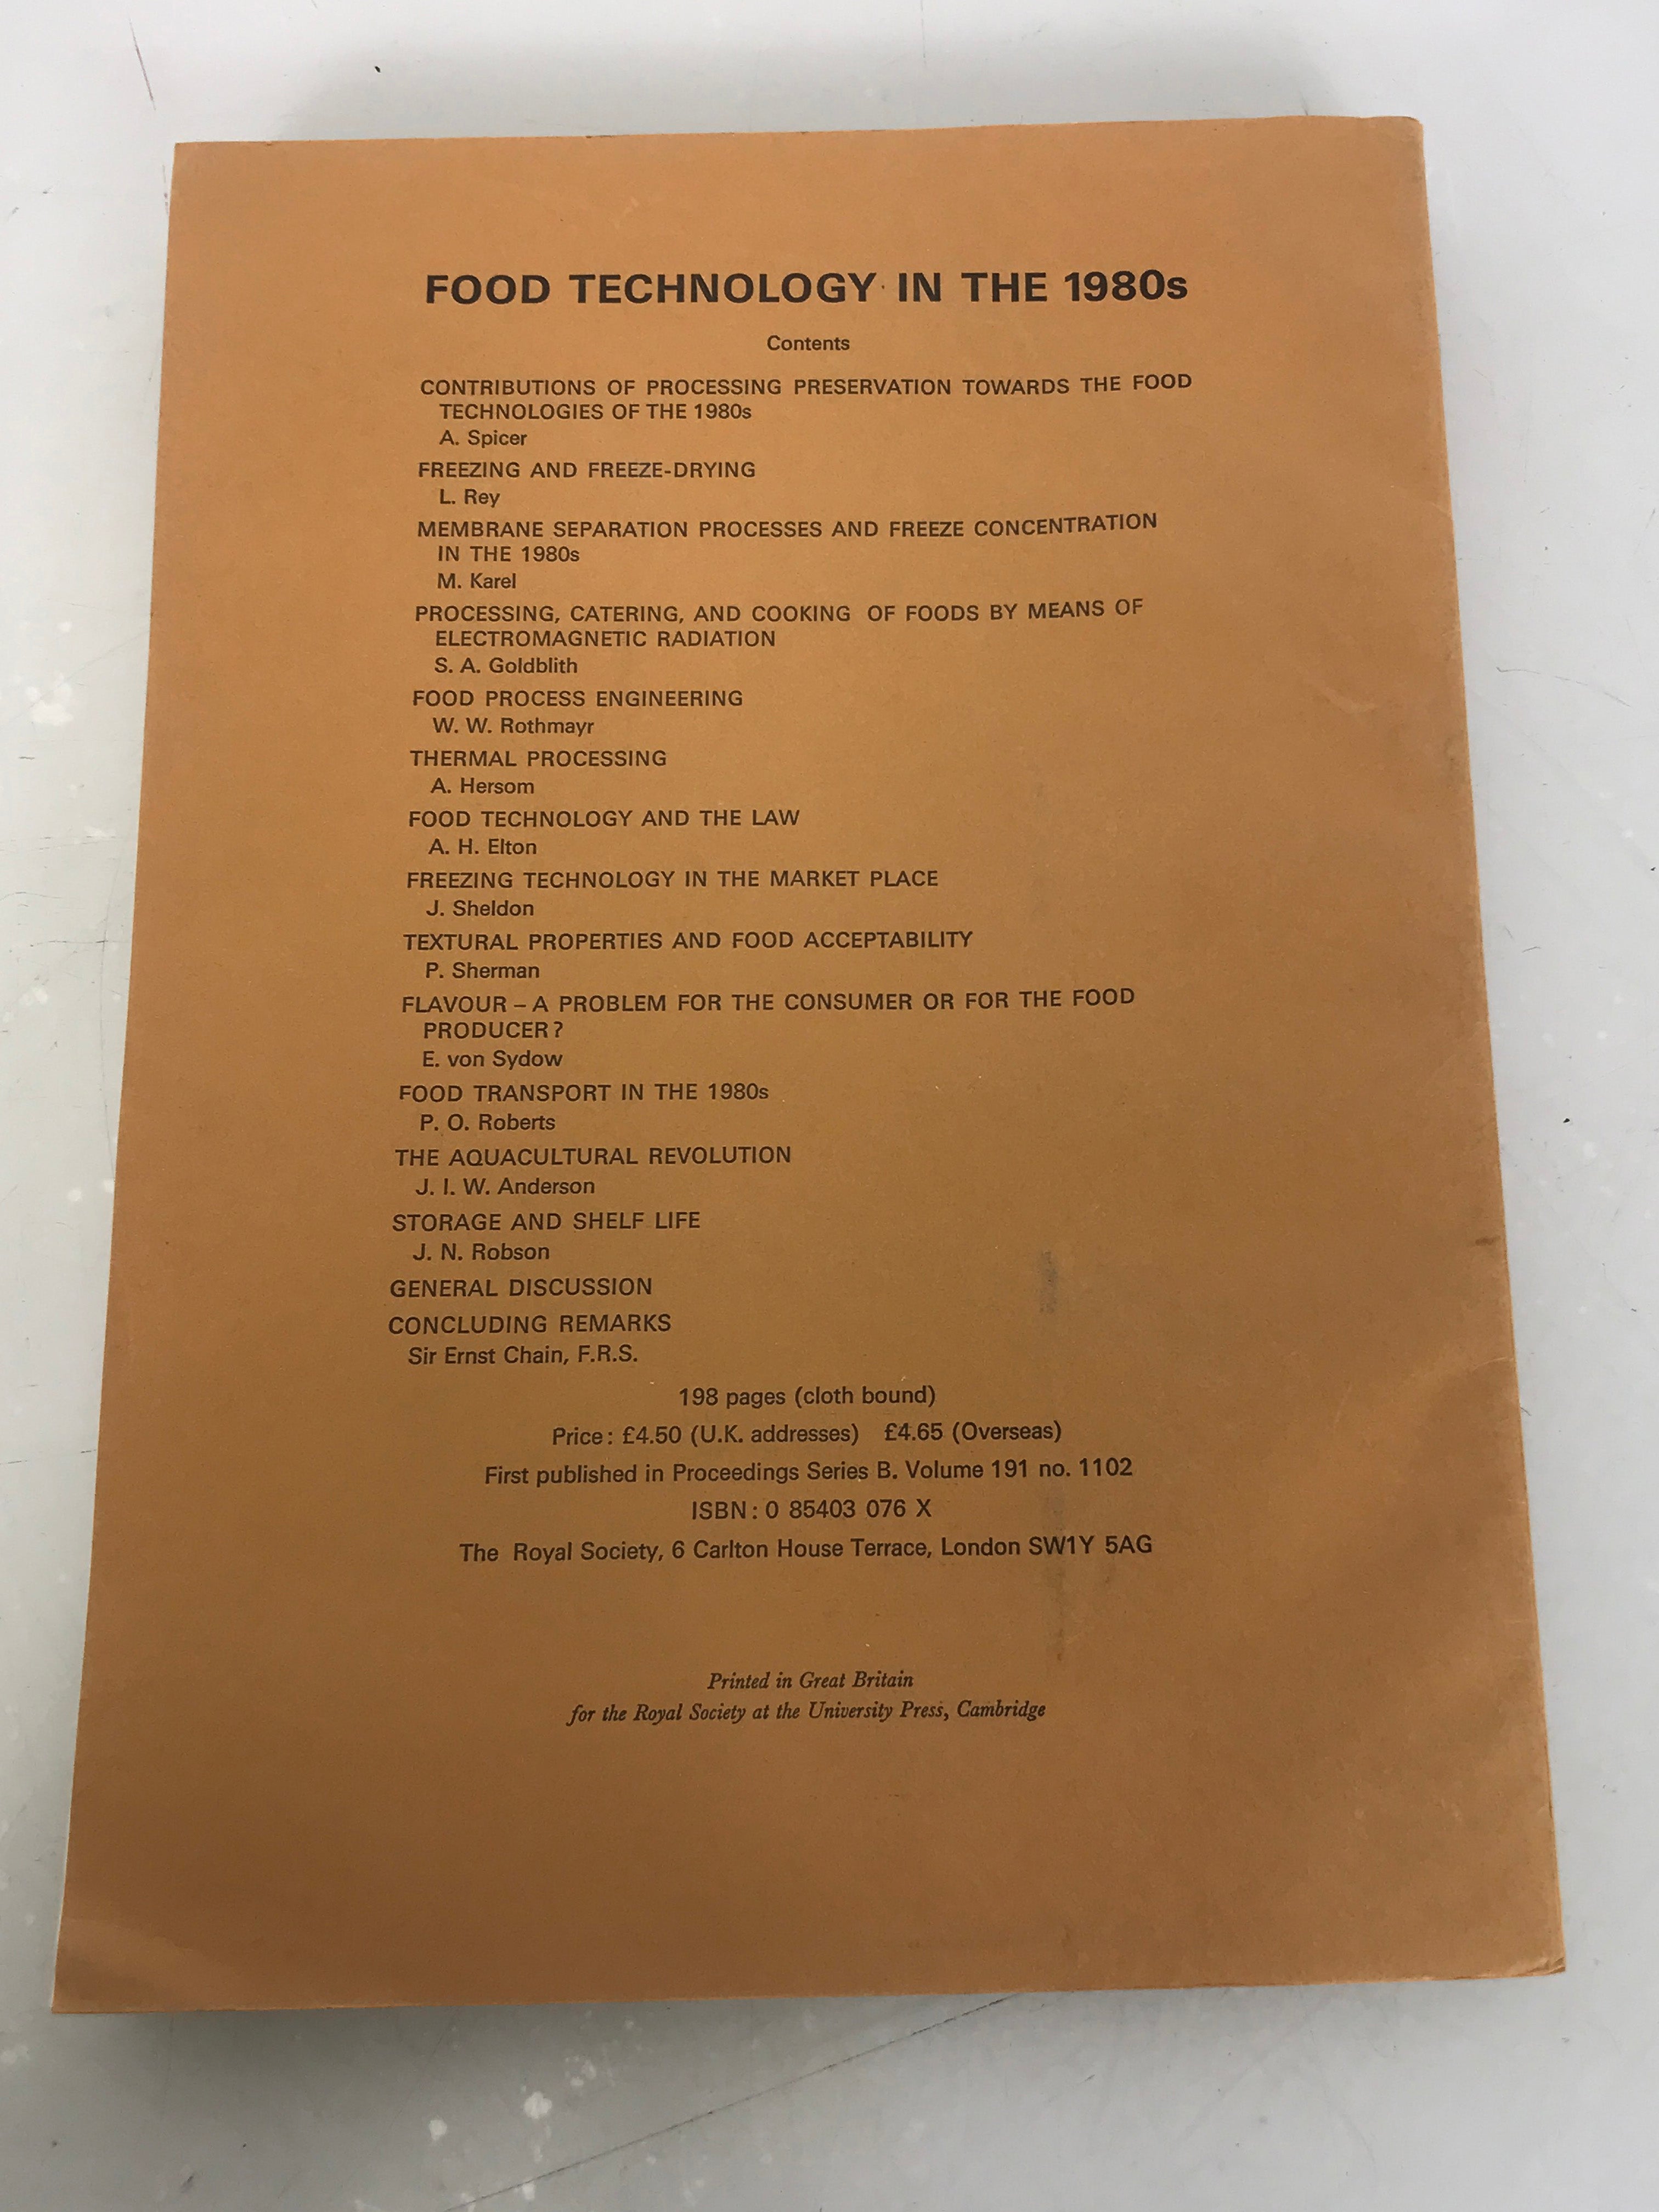 A Discussion on Structural and Functional Aspects of Plasticity April 1977 SC